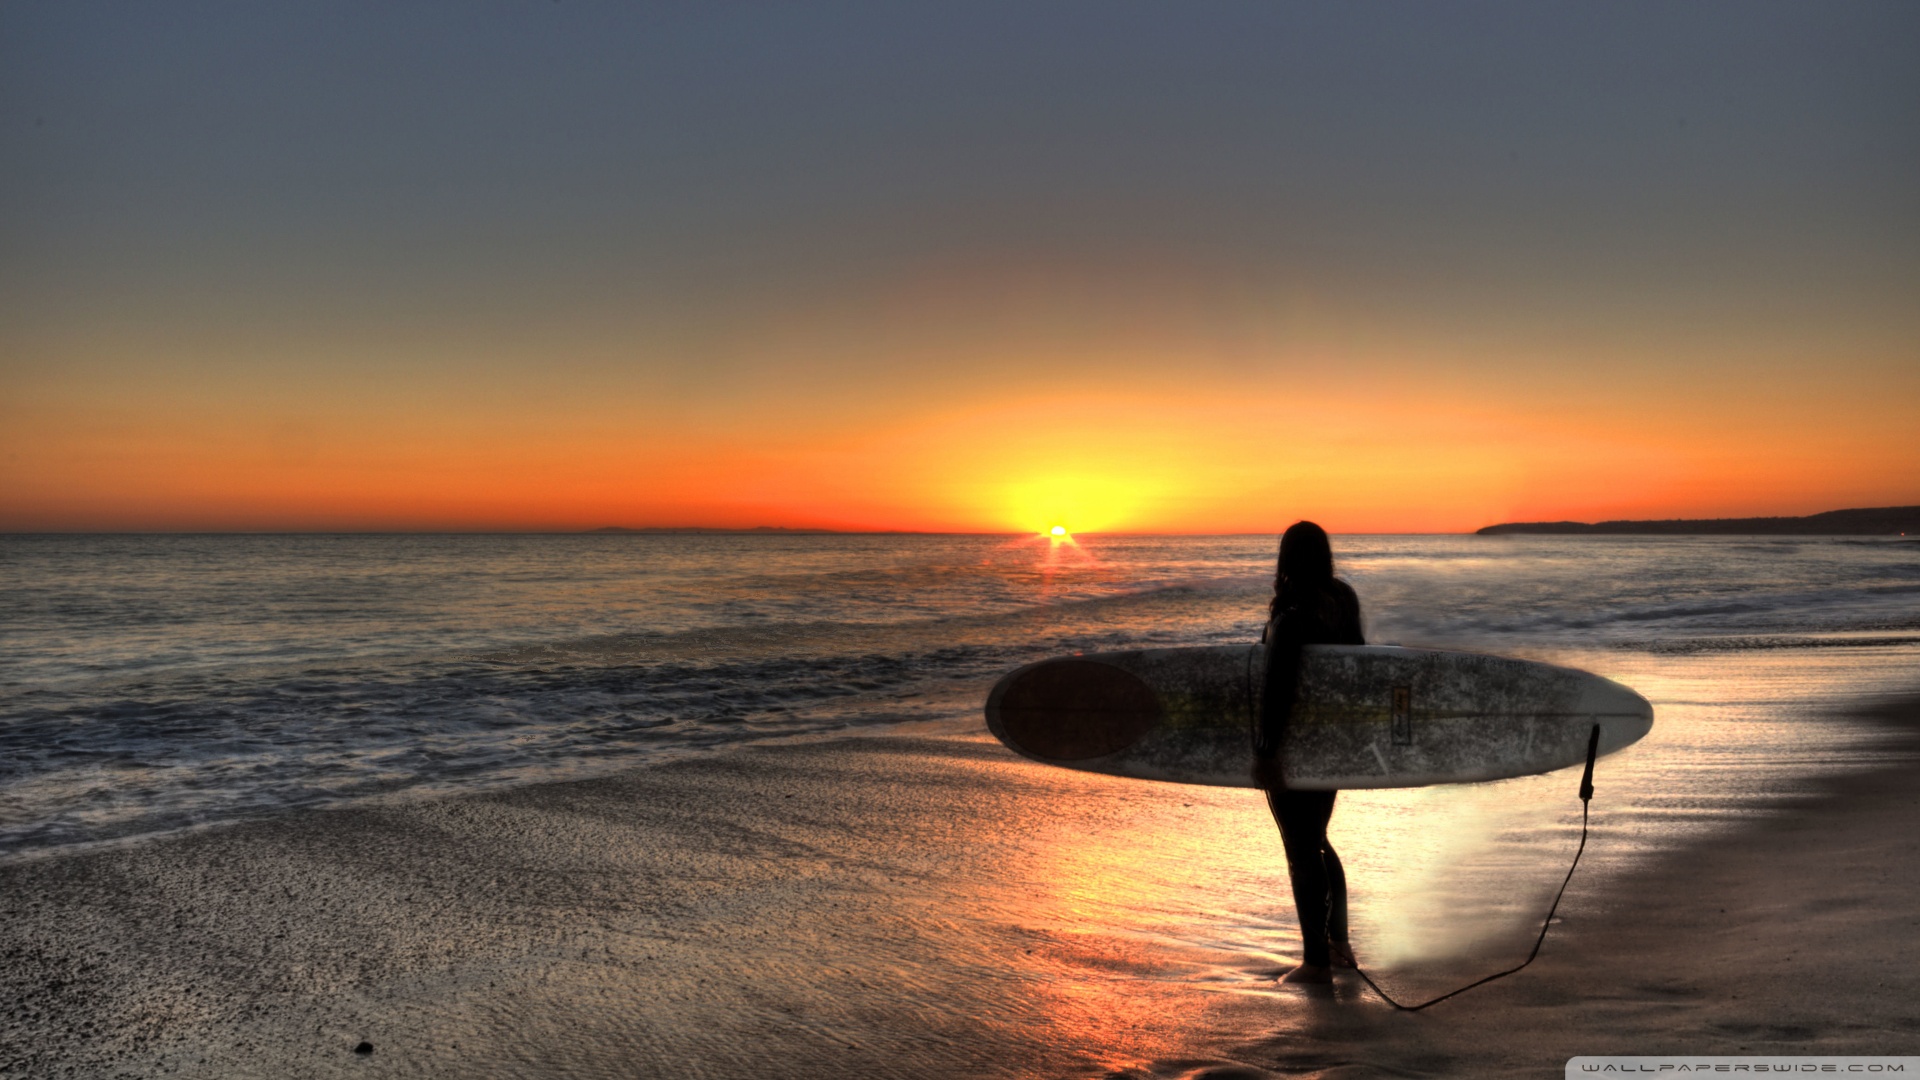 Day Is Over HD Wallpaper Sport Surfing Water Sports